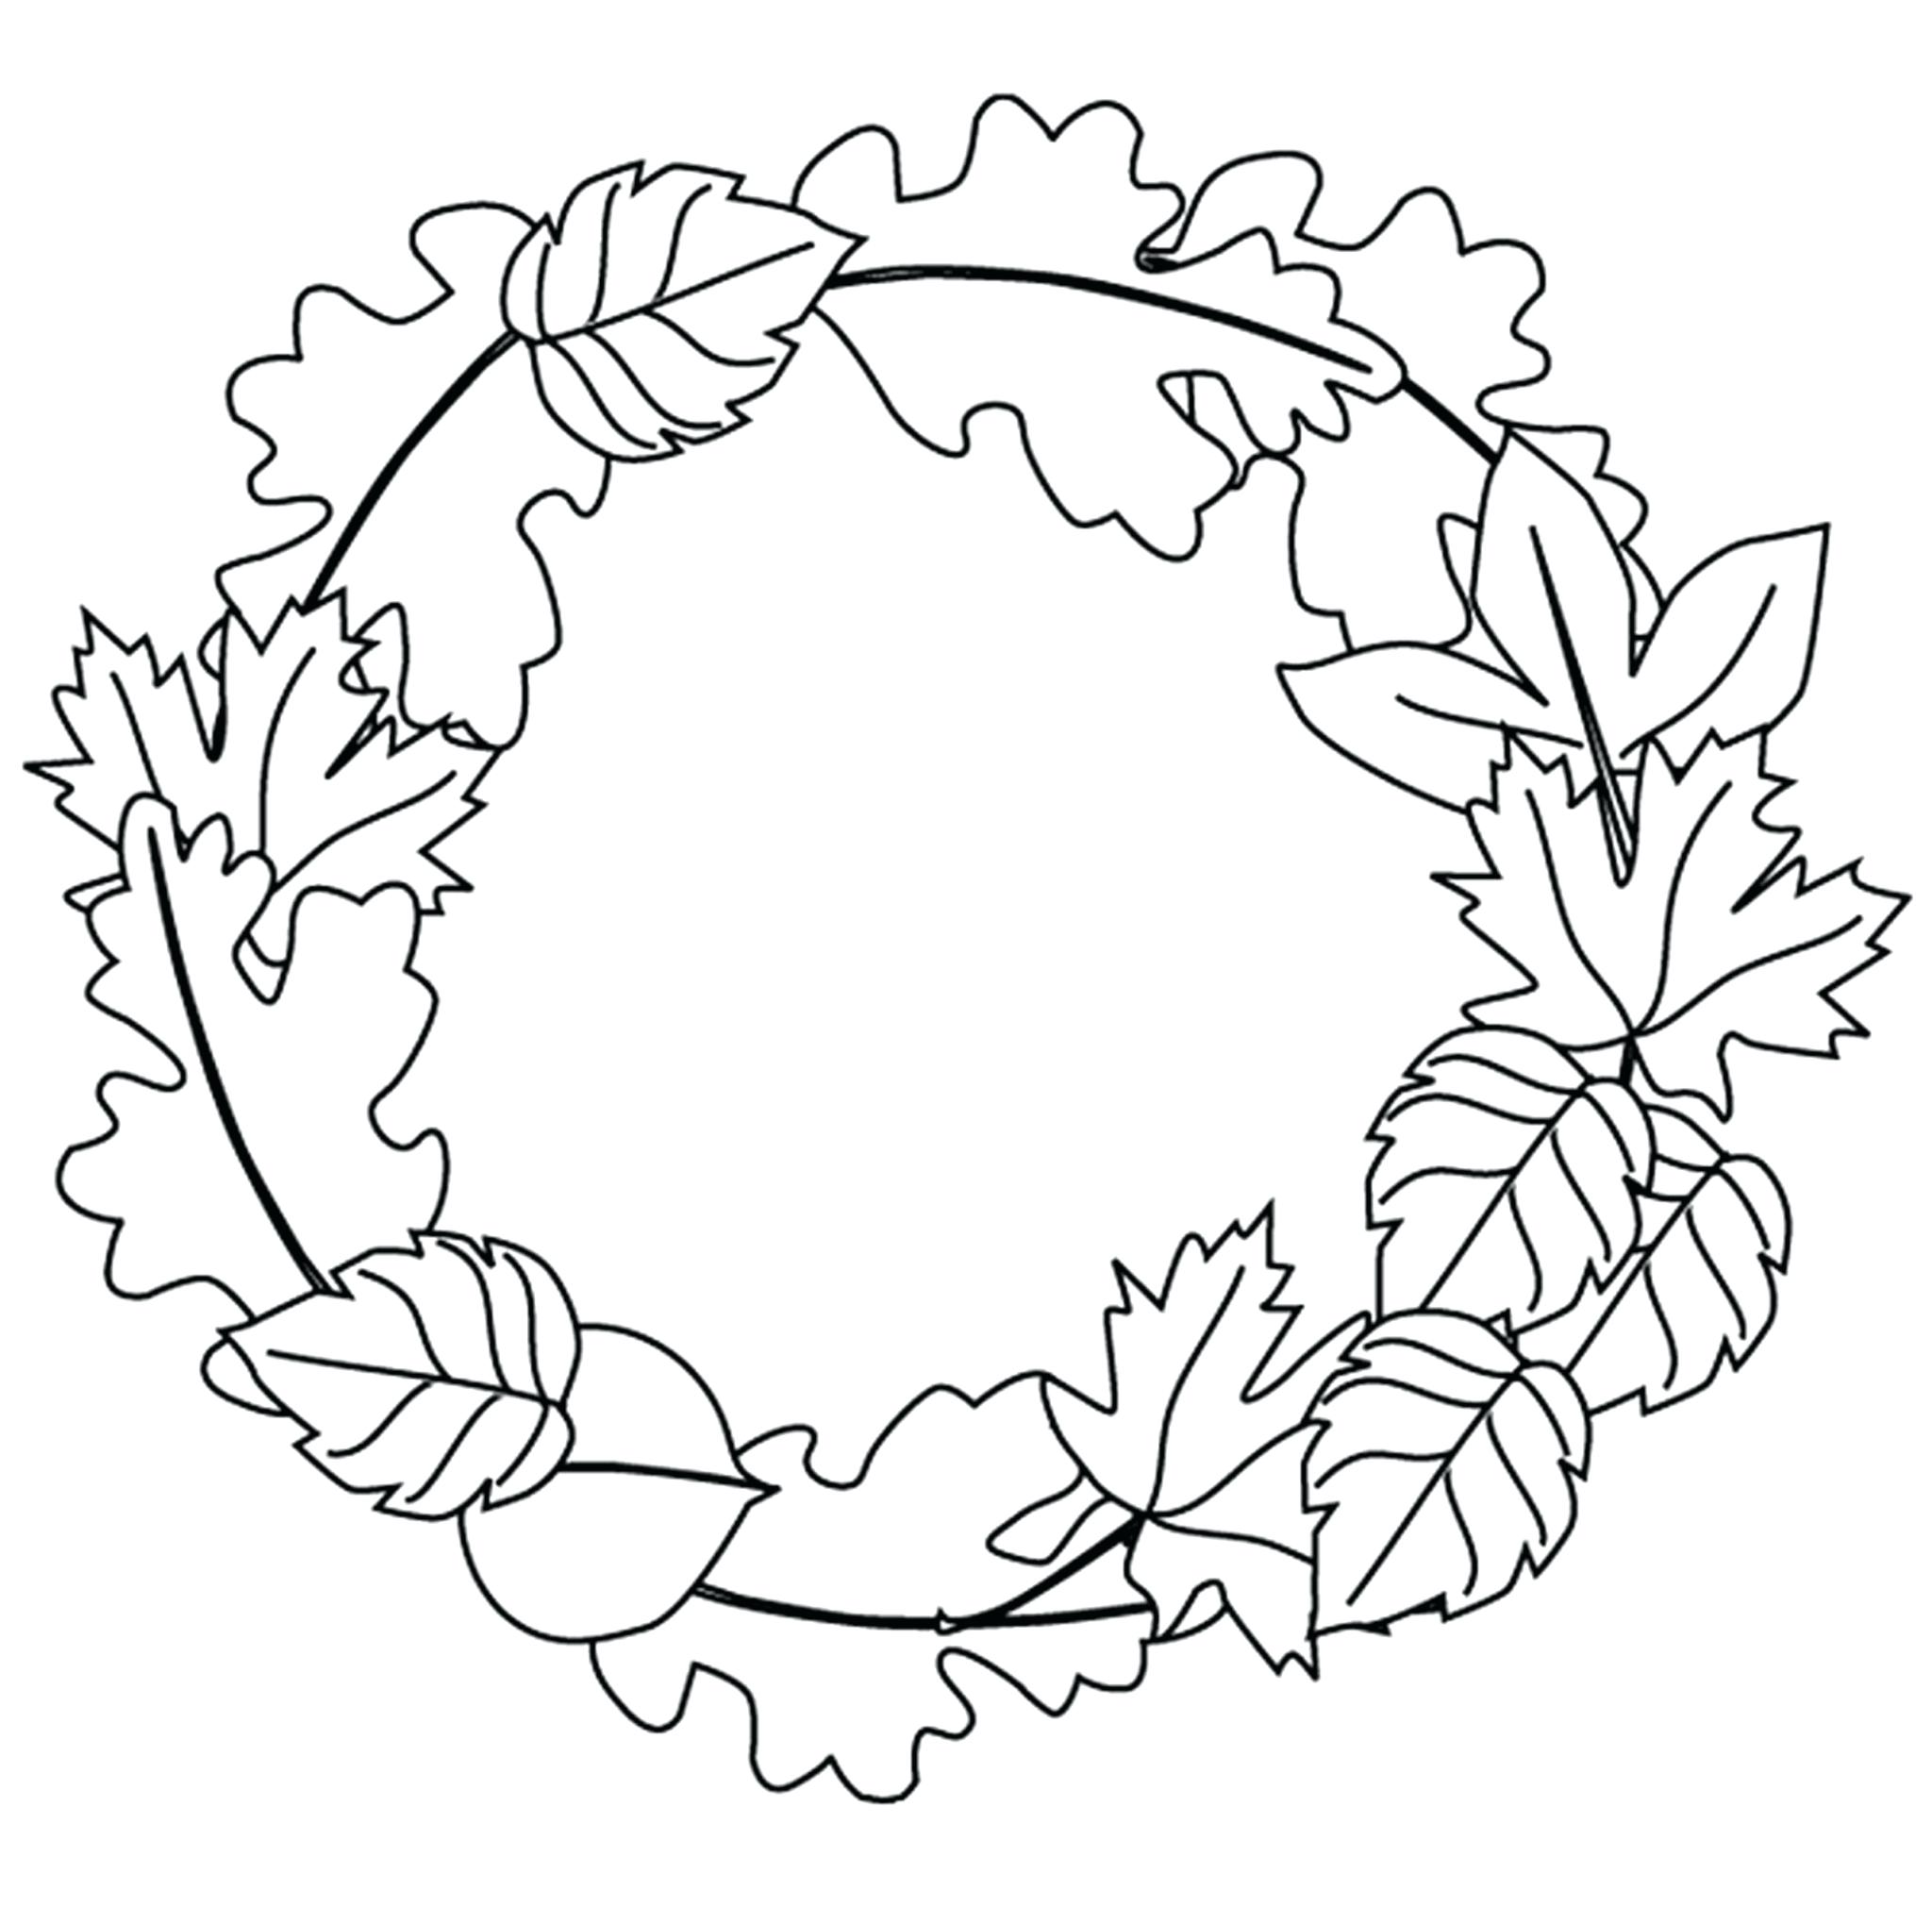 Fall Leaves Coloring Pages For Kindergarten at GetColorings.com   Free ...